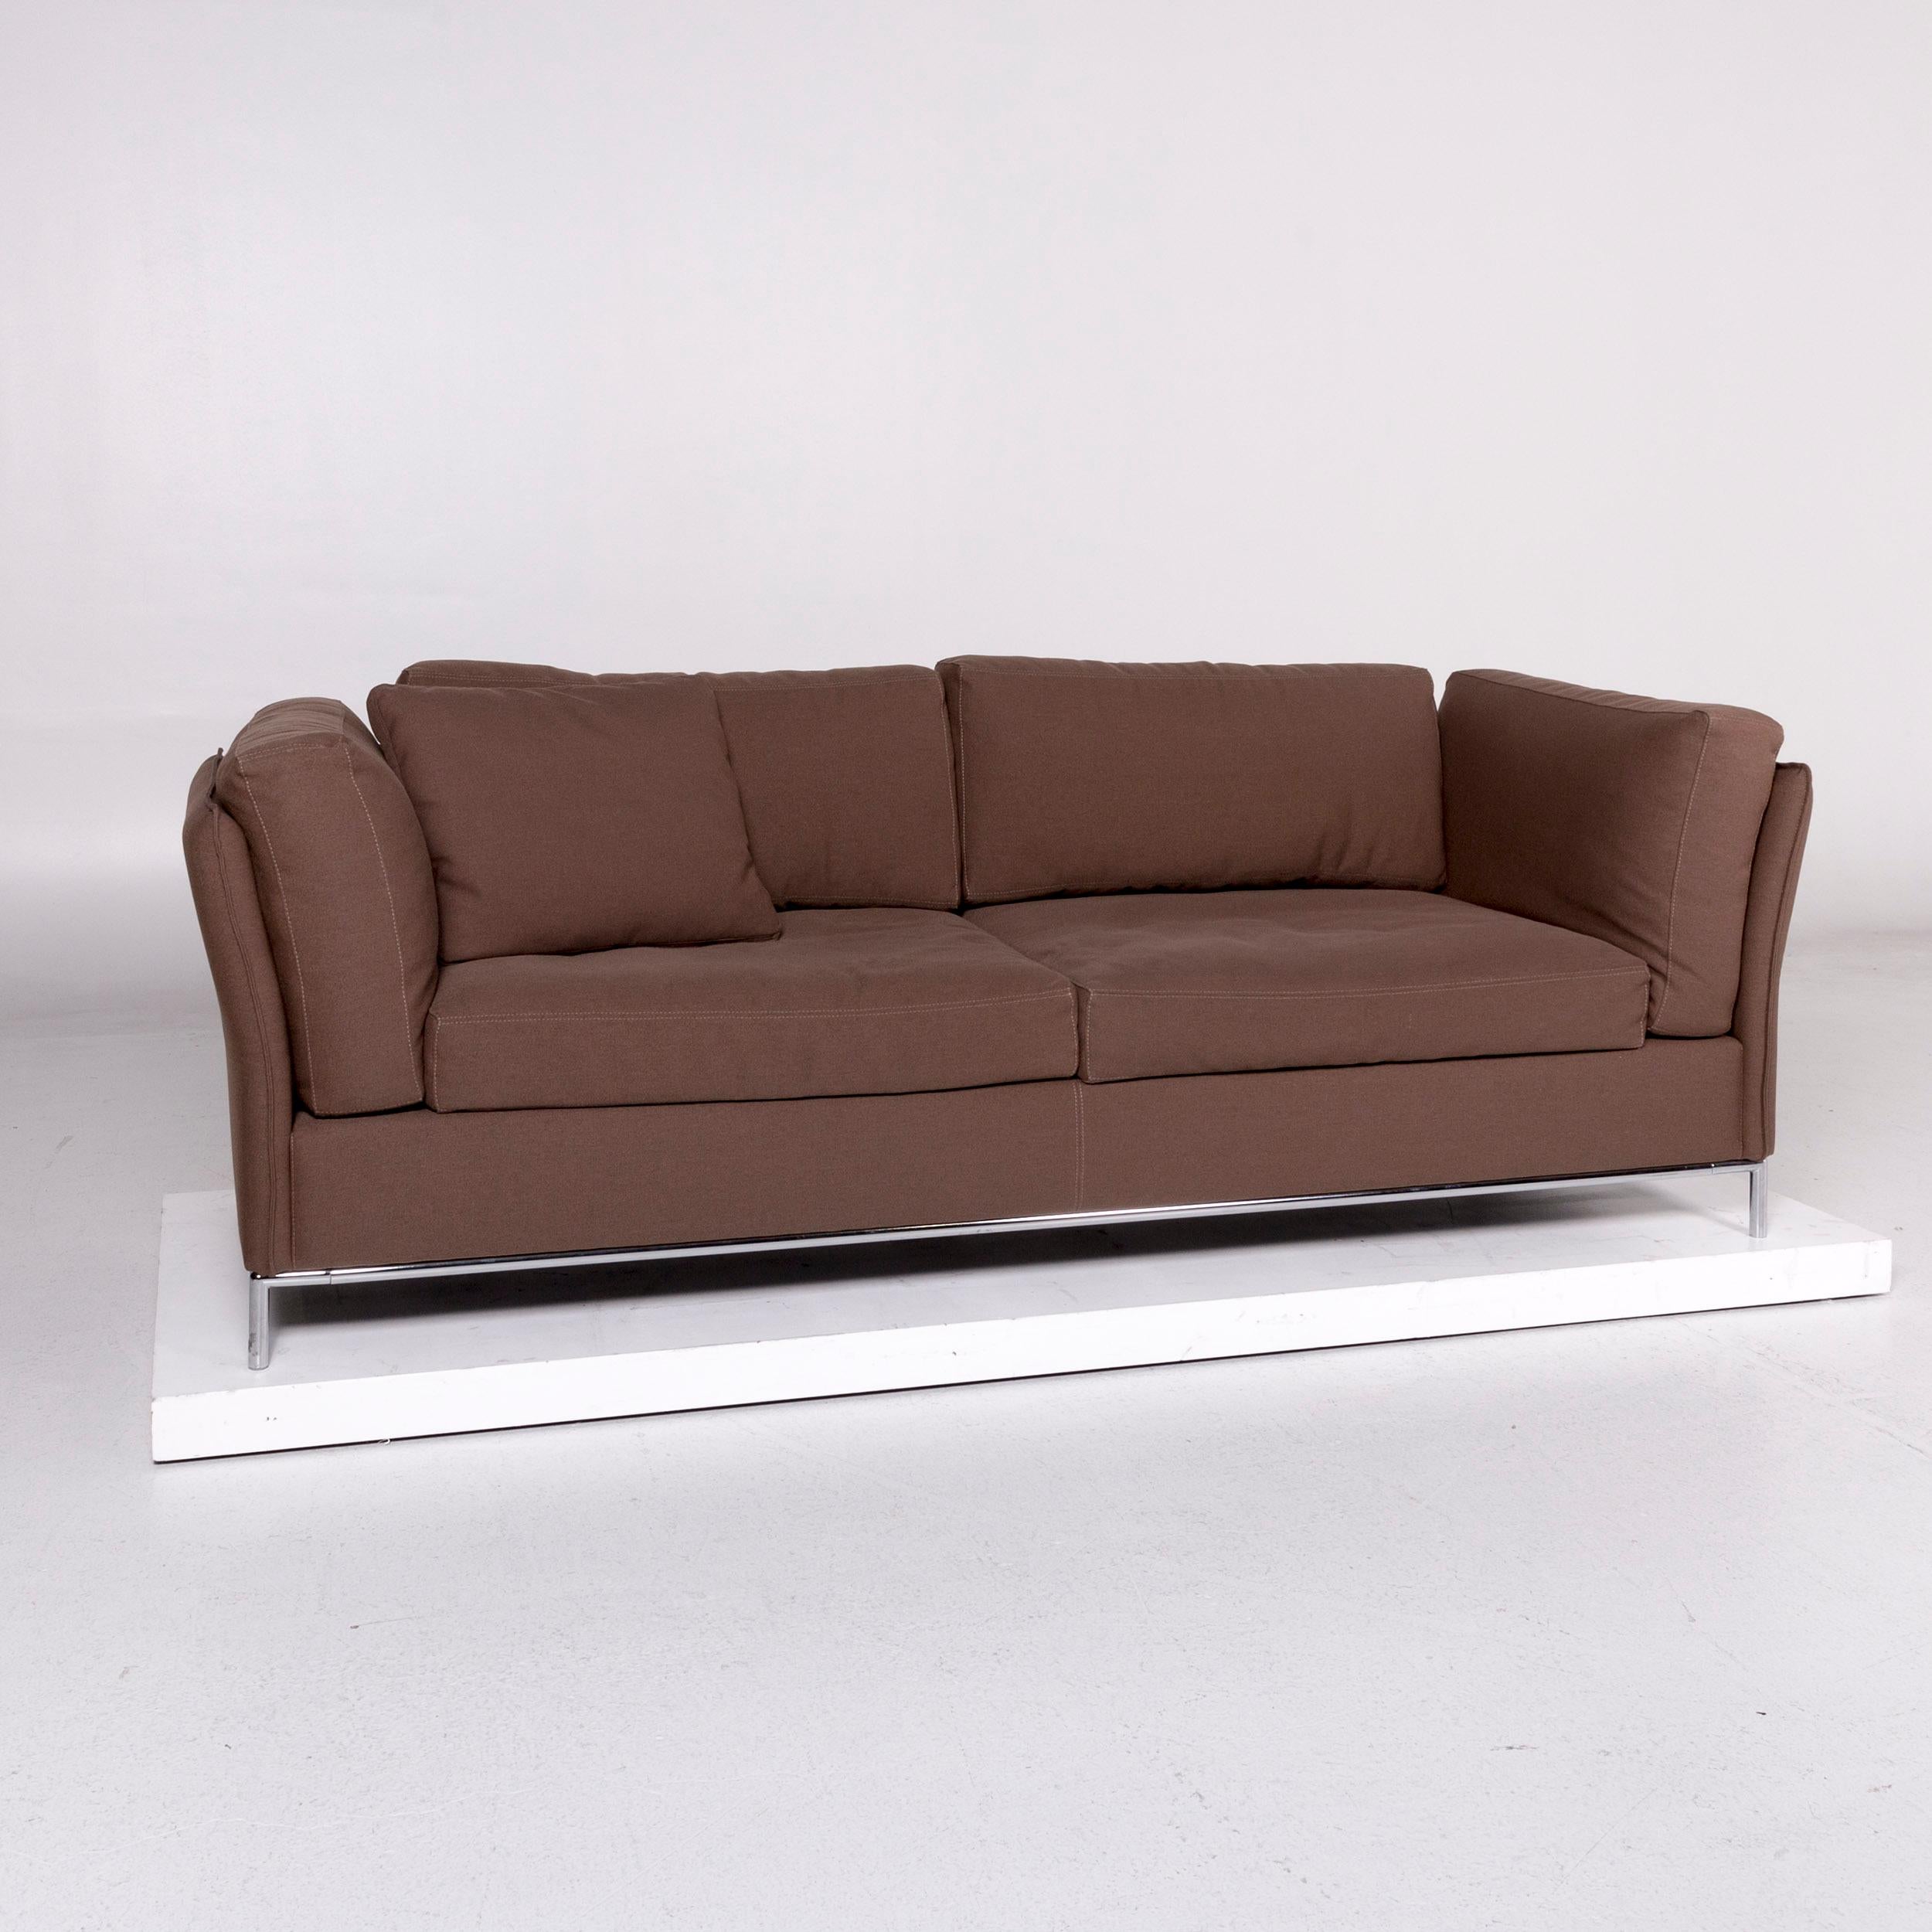 We bring to you a Machalke loveseat fabric sofa brown three-seat couch.

 Product measurements in centimeters:
 
Depth 83
Width 230
Height 150
Seat-height 47
Rest-height 95
Seat-depth 69
Seat-width 170
Back-height 35.
 